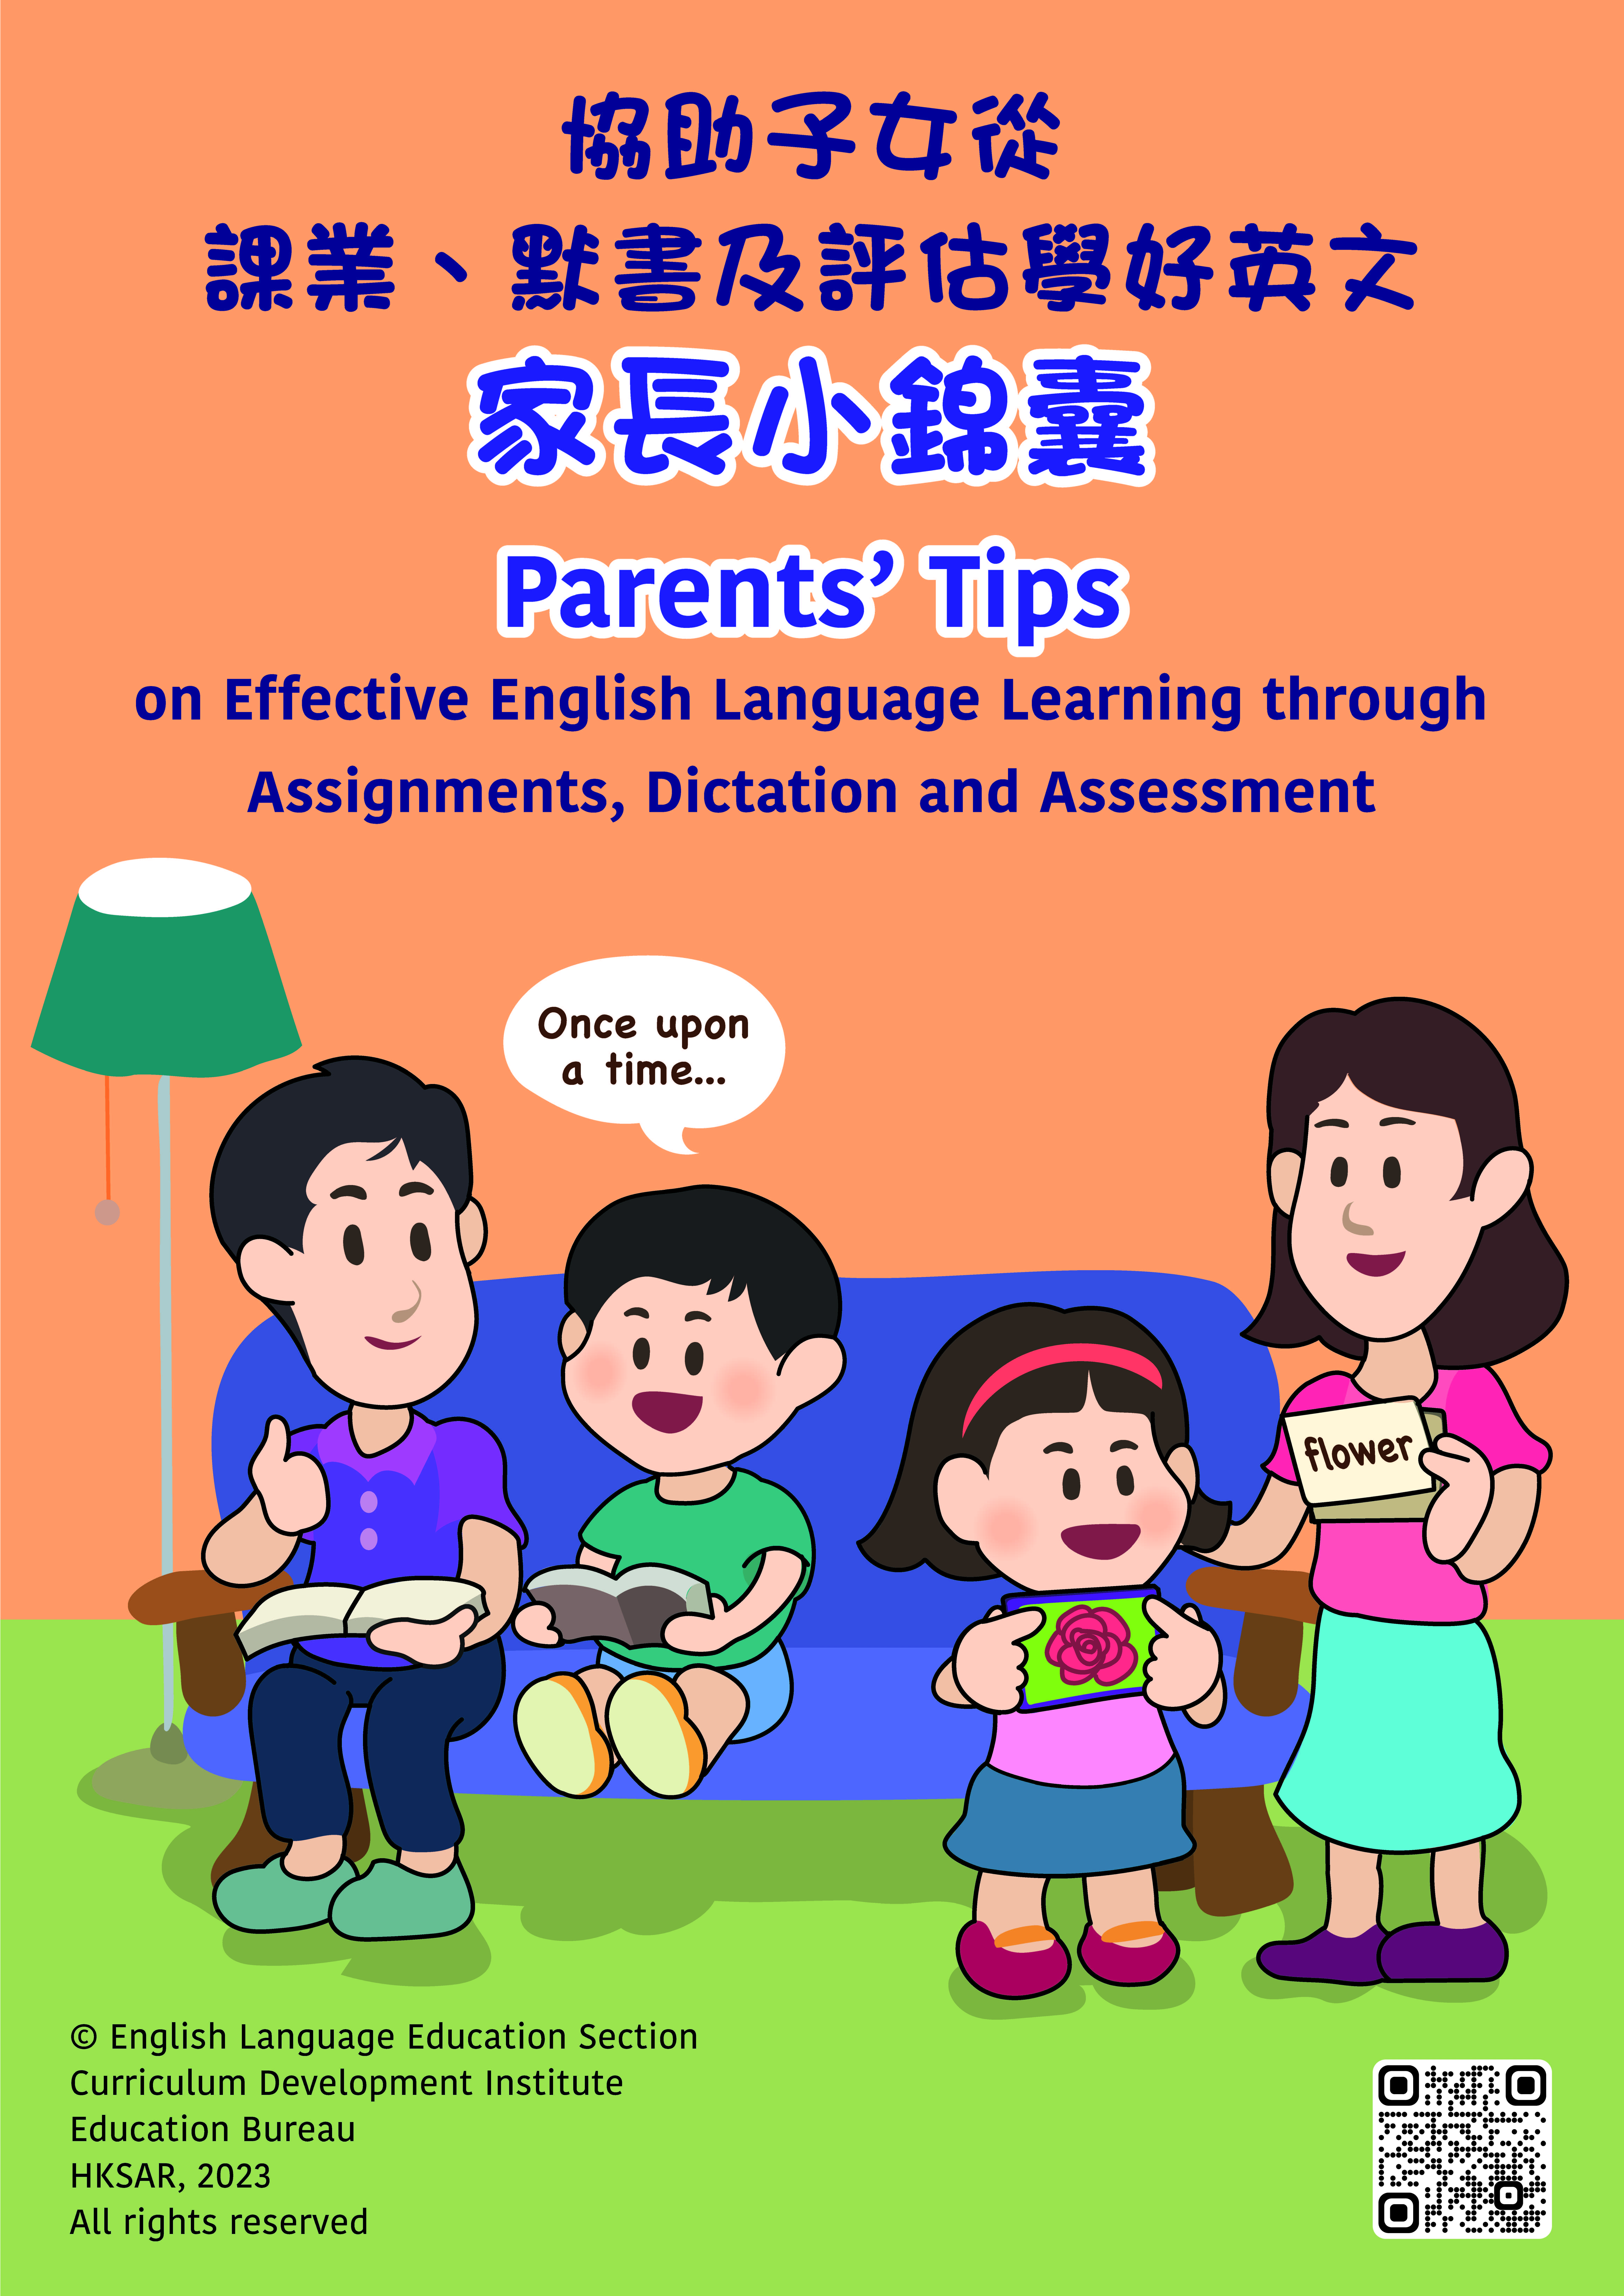 Pamphlet on “Parents’ Tips on Effective English Language Learning through  Assignments, Dictation and Assessment”